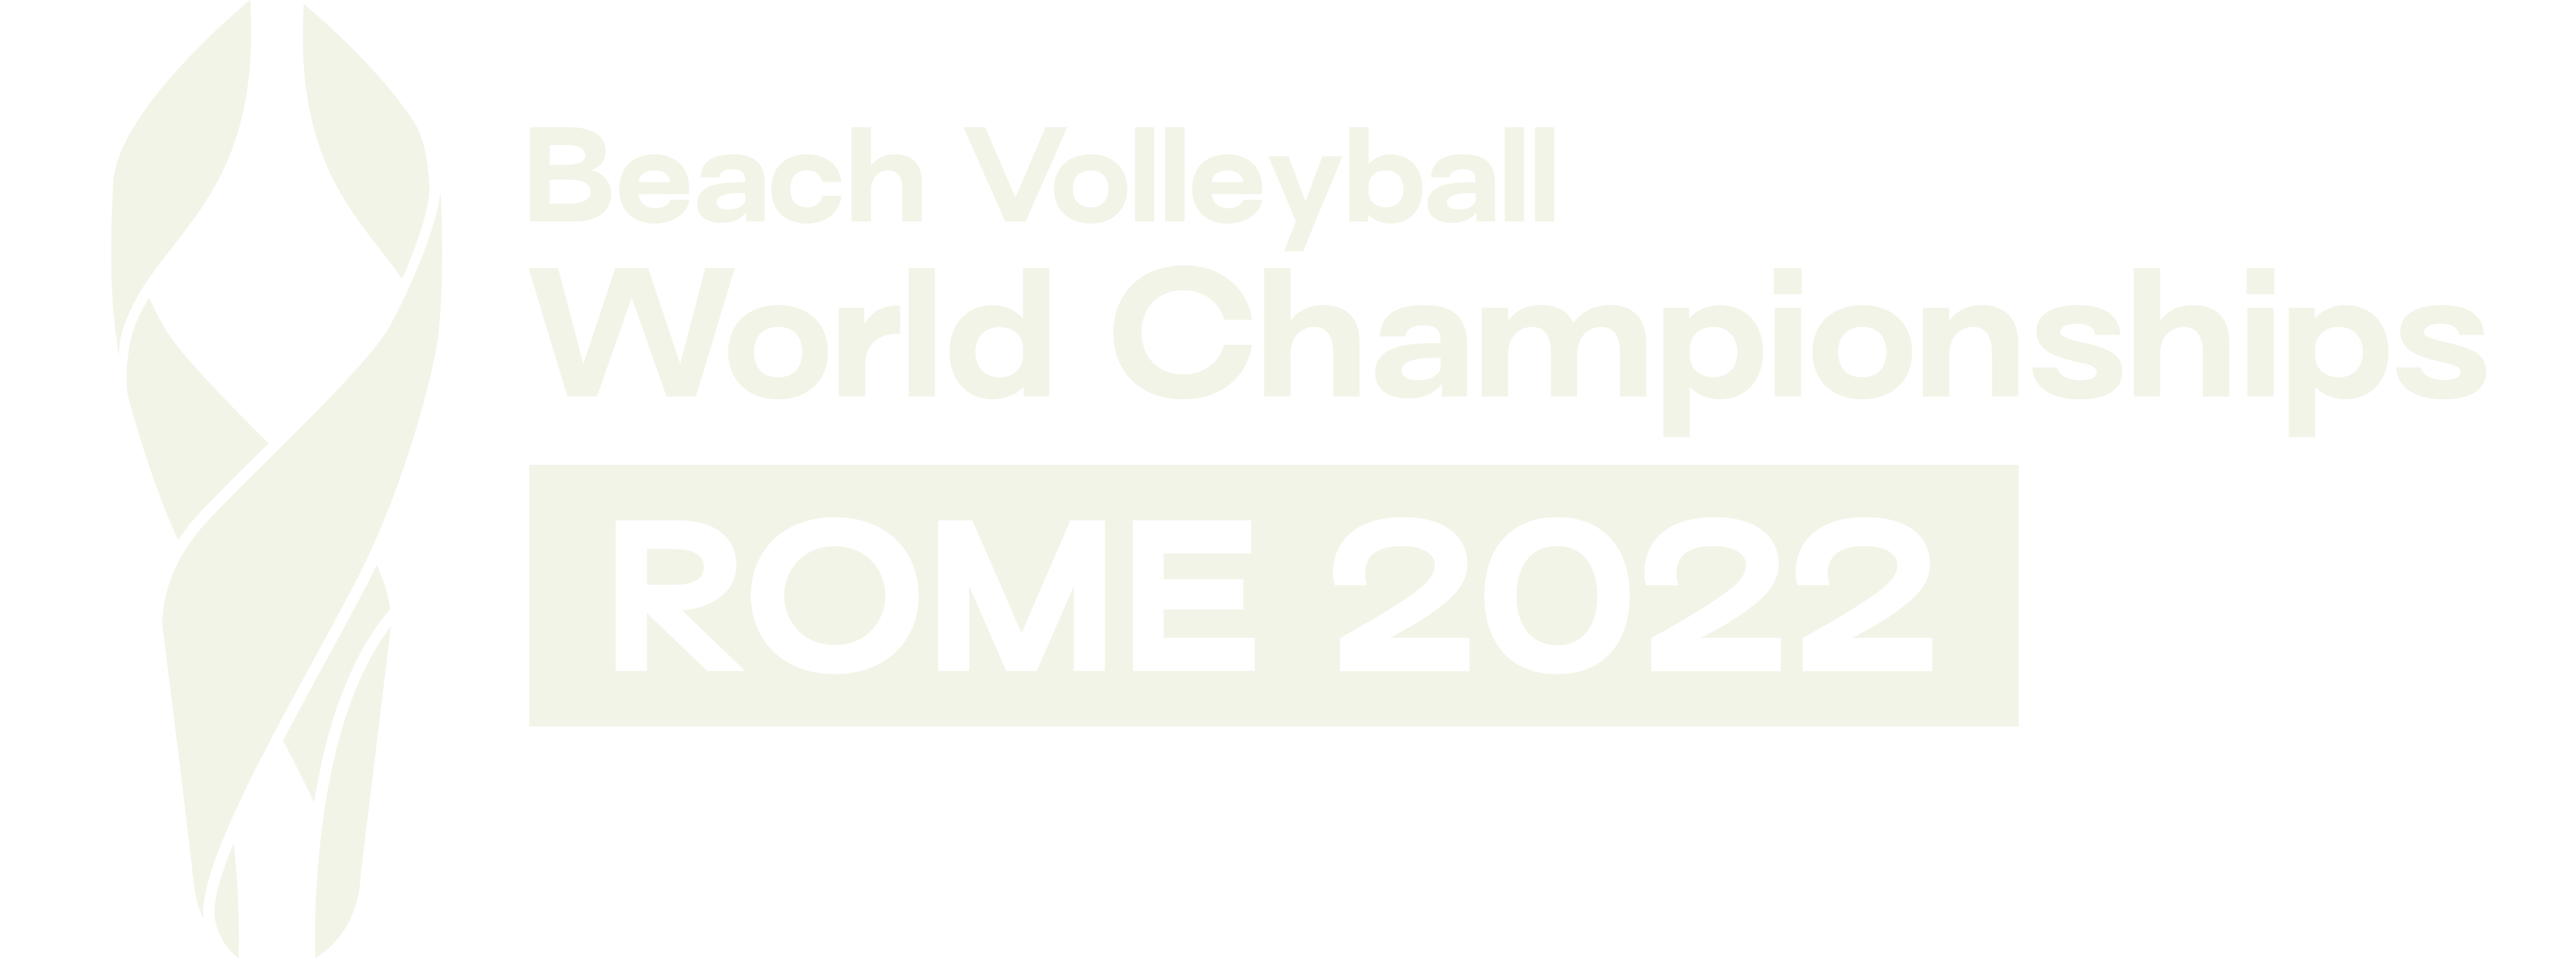 Rome 2022 World Championships only a month away volleyballworld